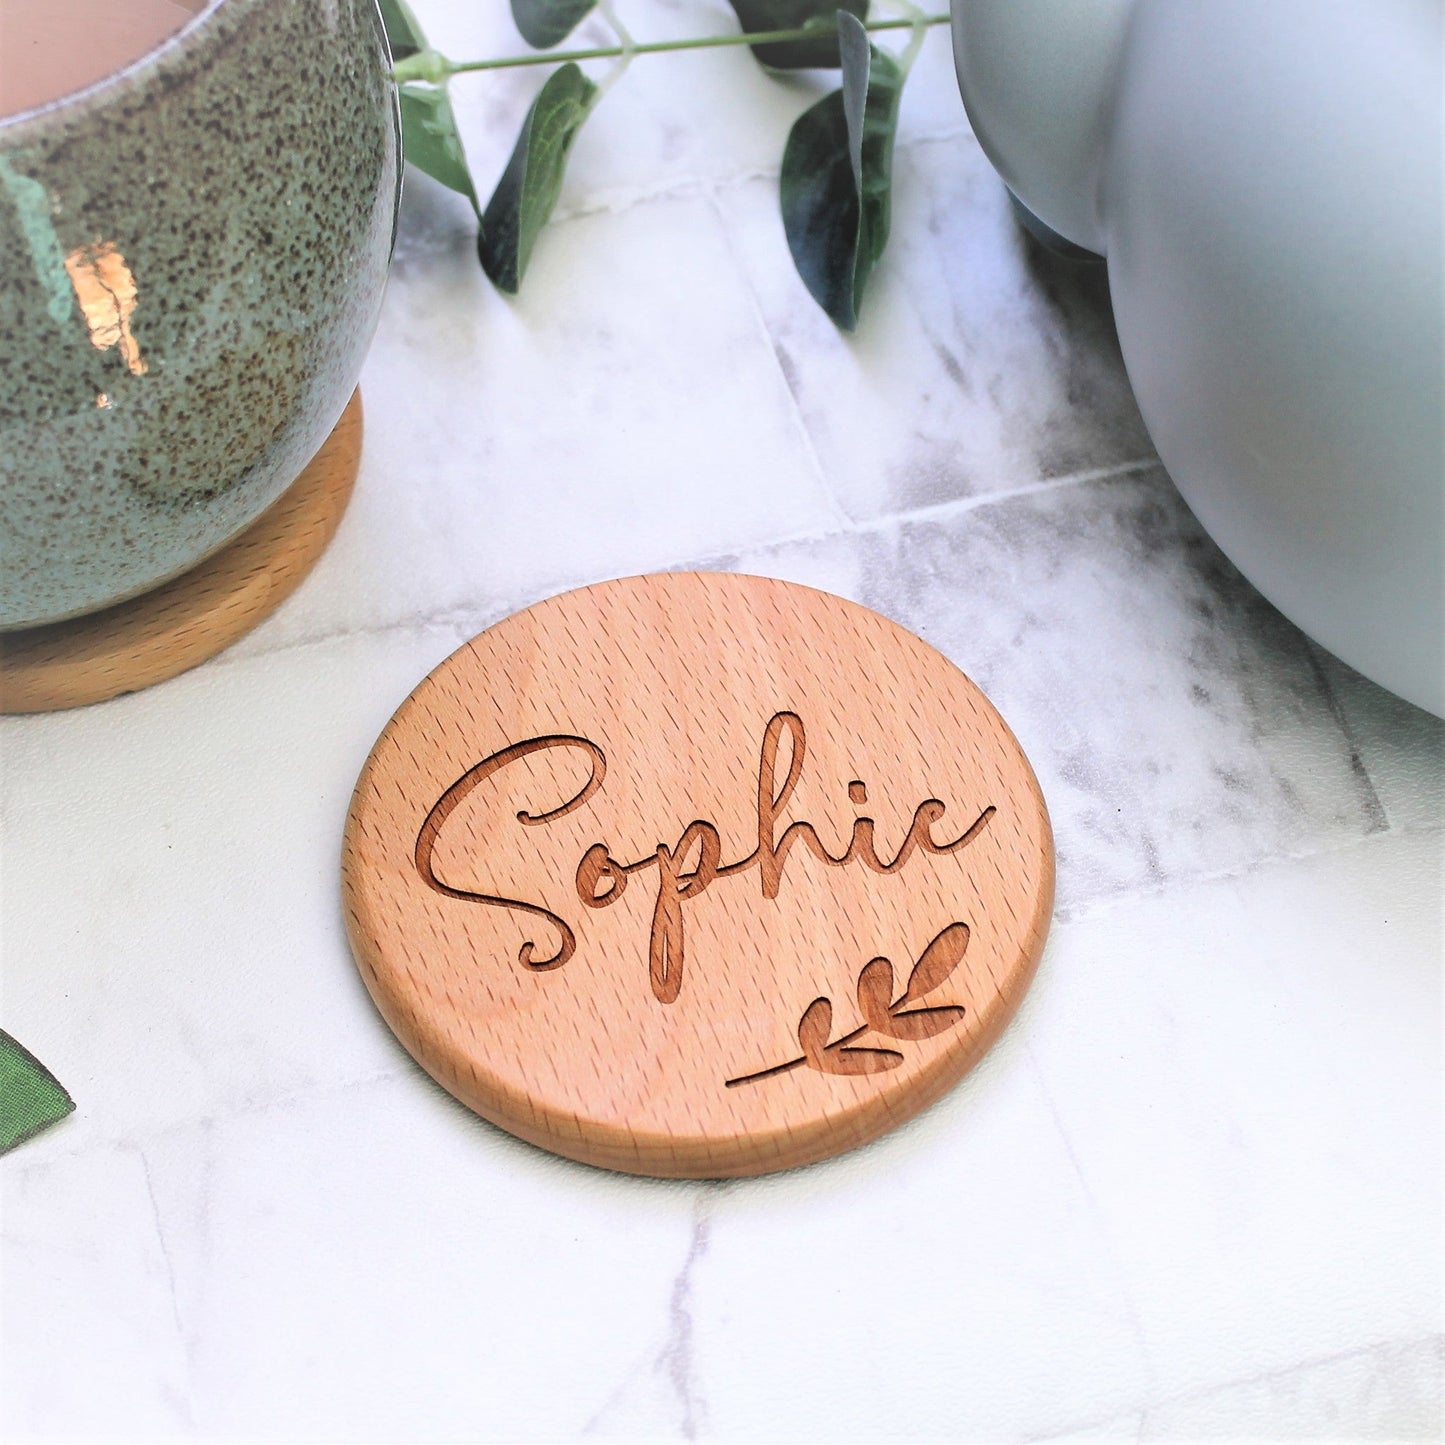 wooden engraved coaster with name and leaf design